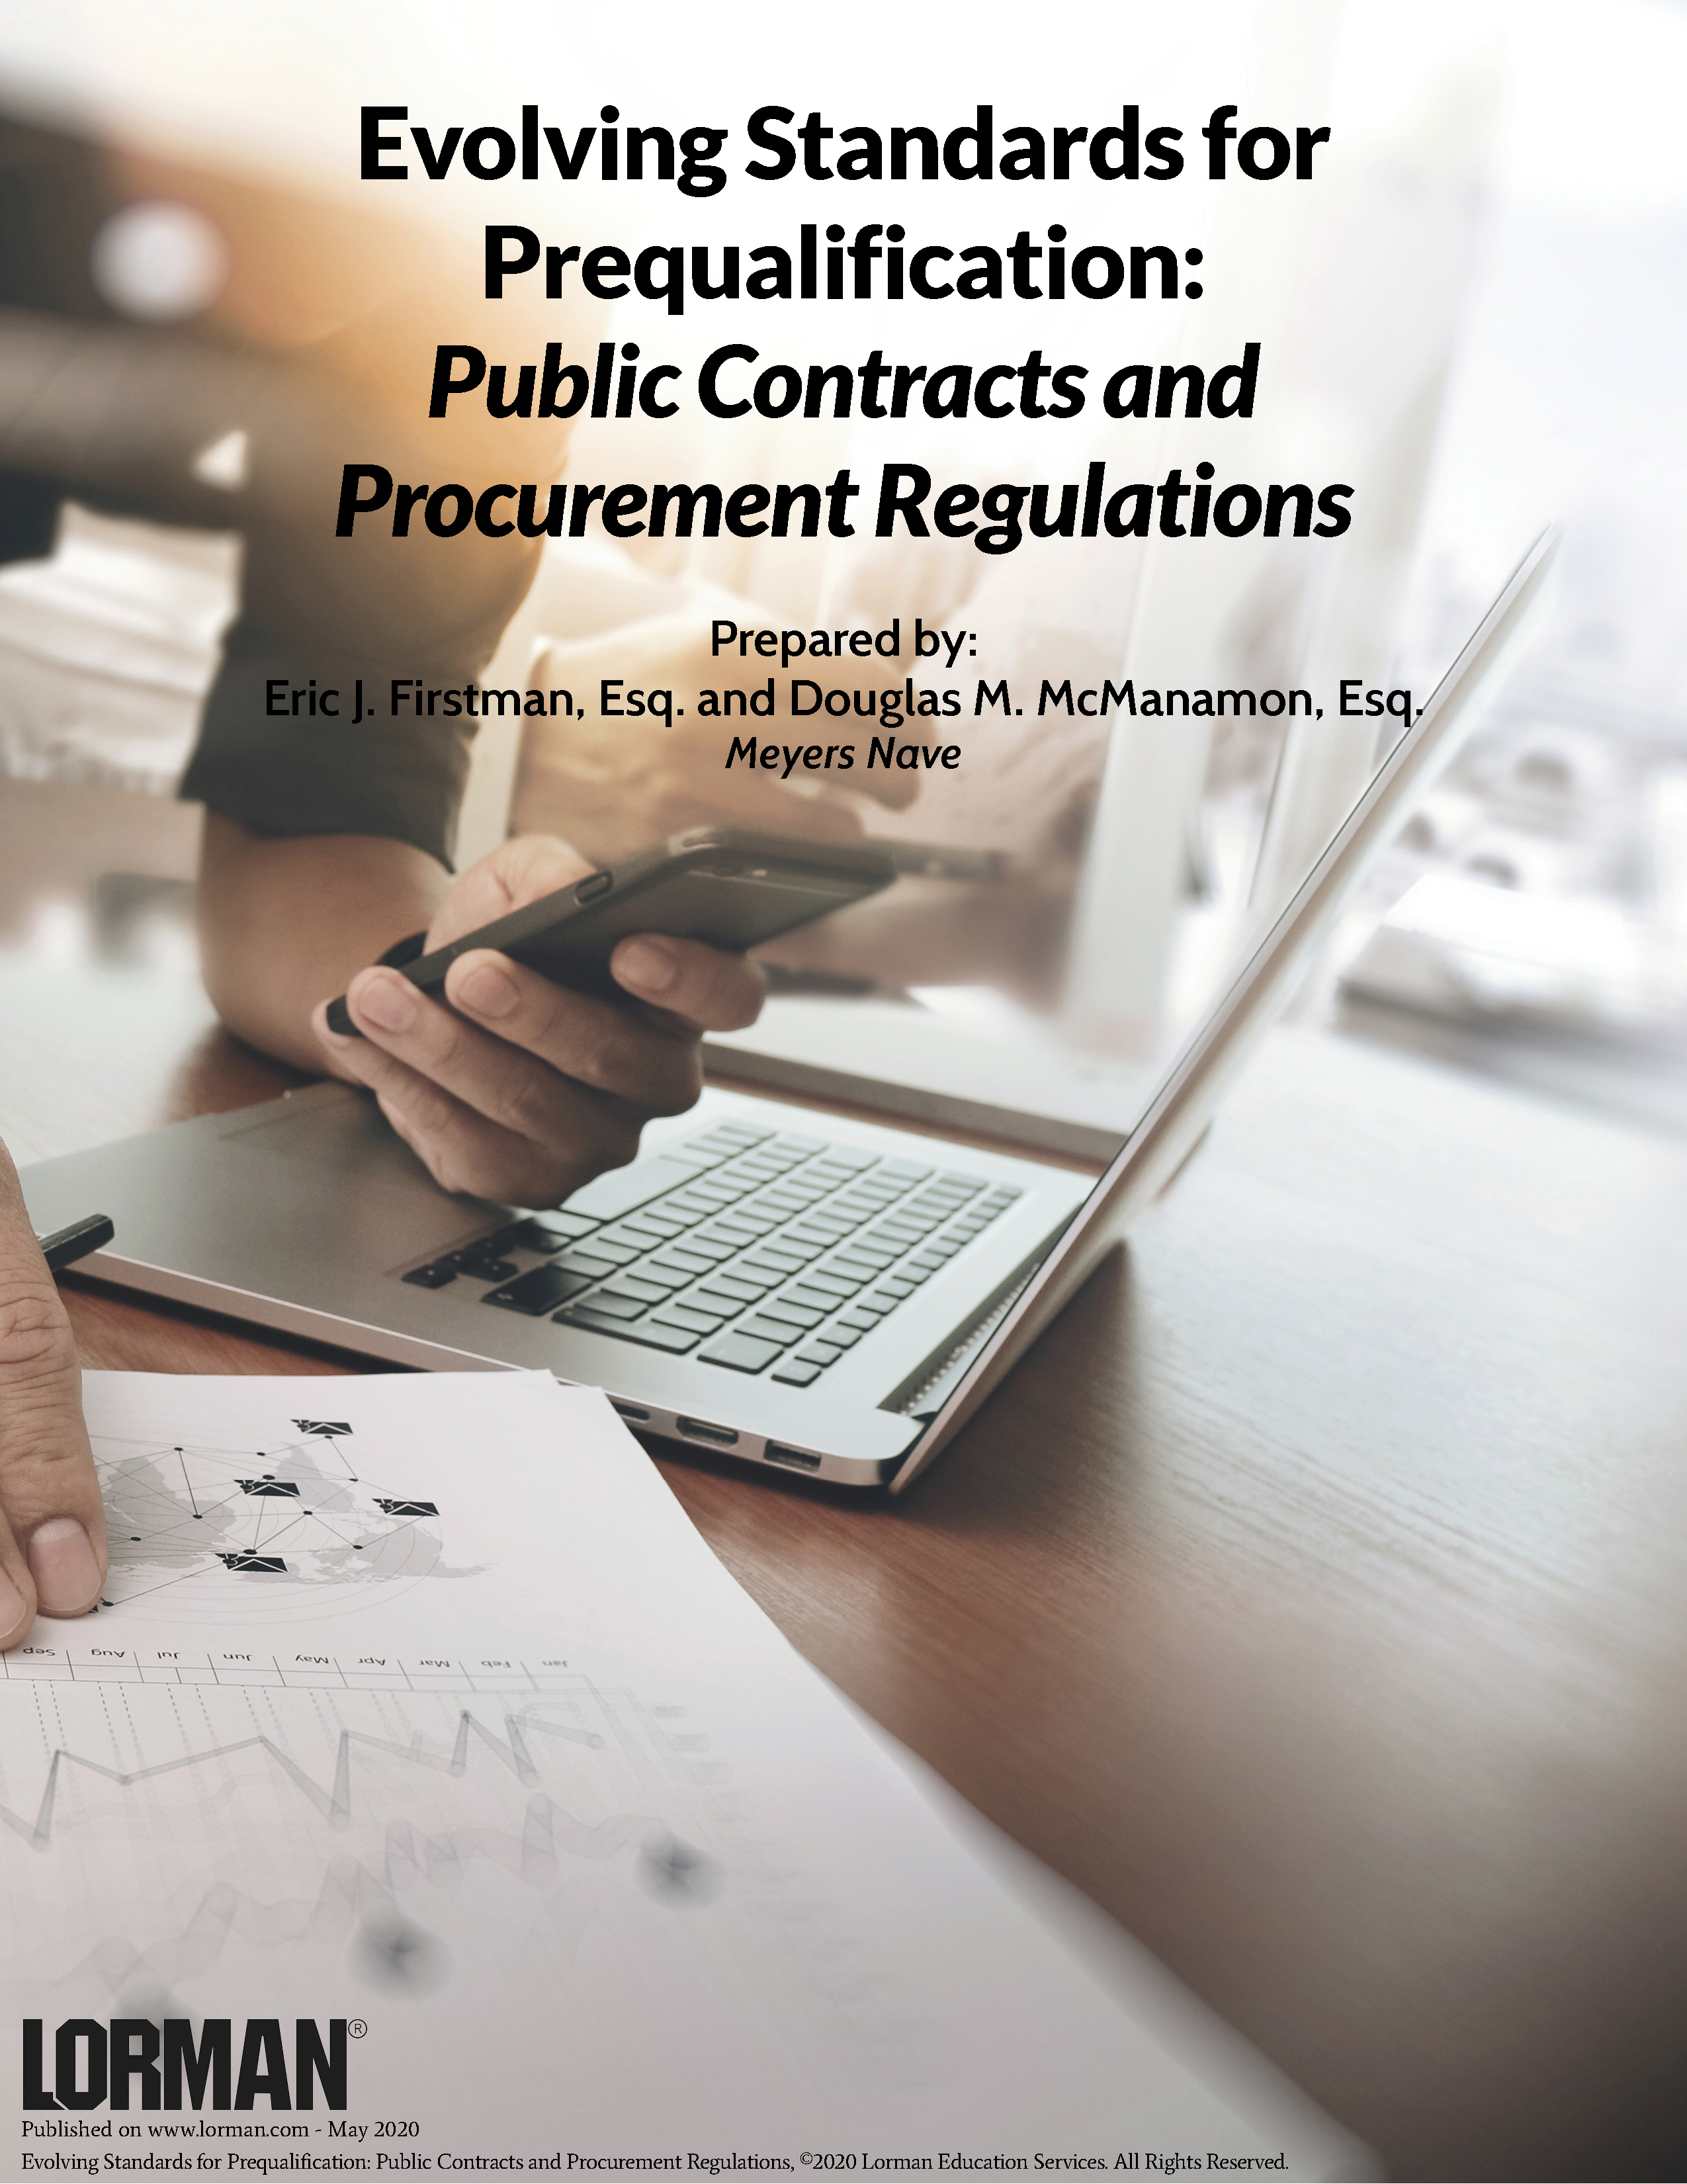 Evolving Standards for Prequalification: Public Contracts and Procurement Regulations